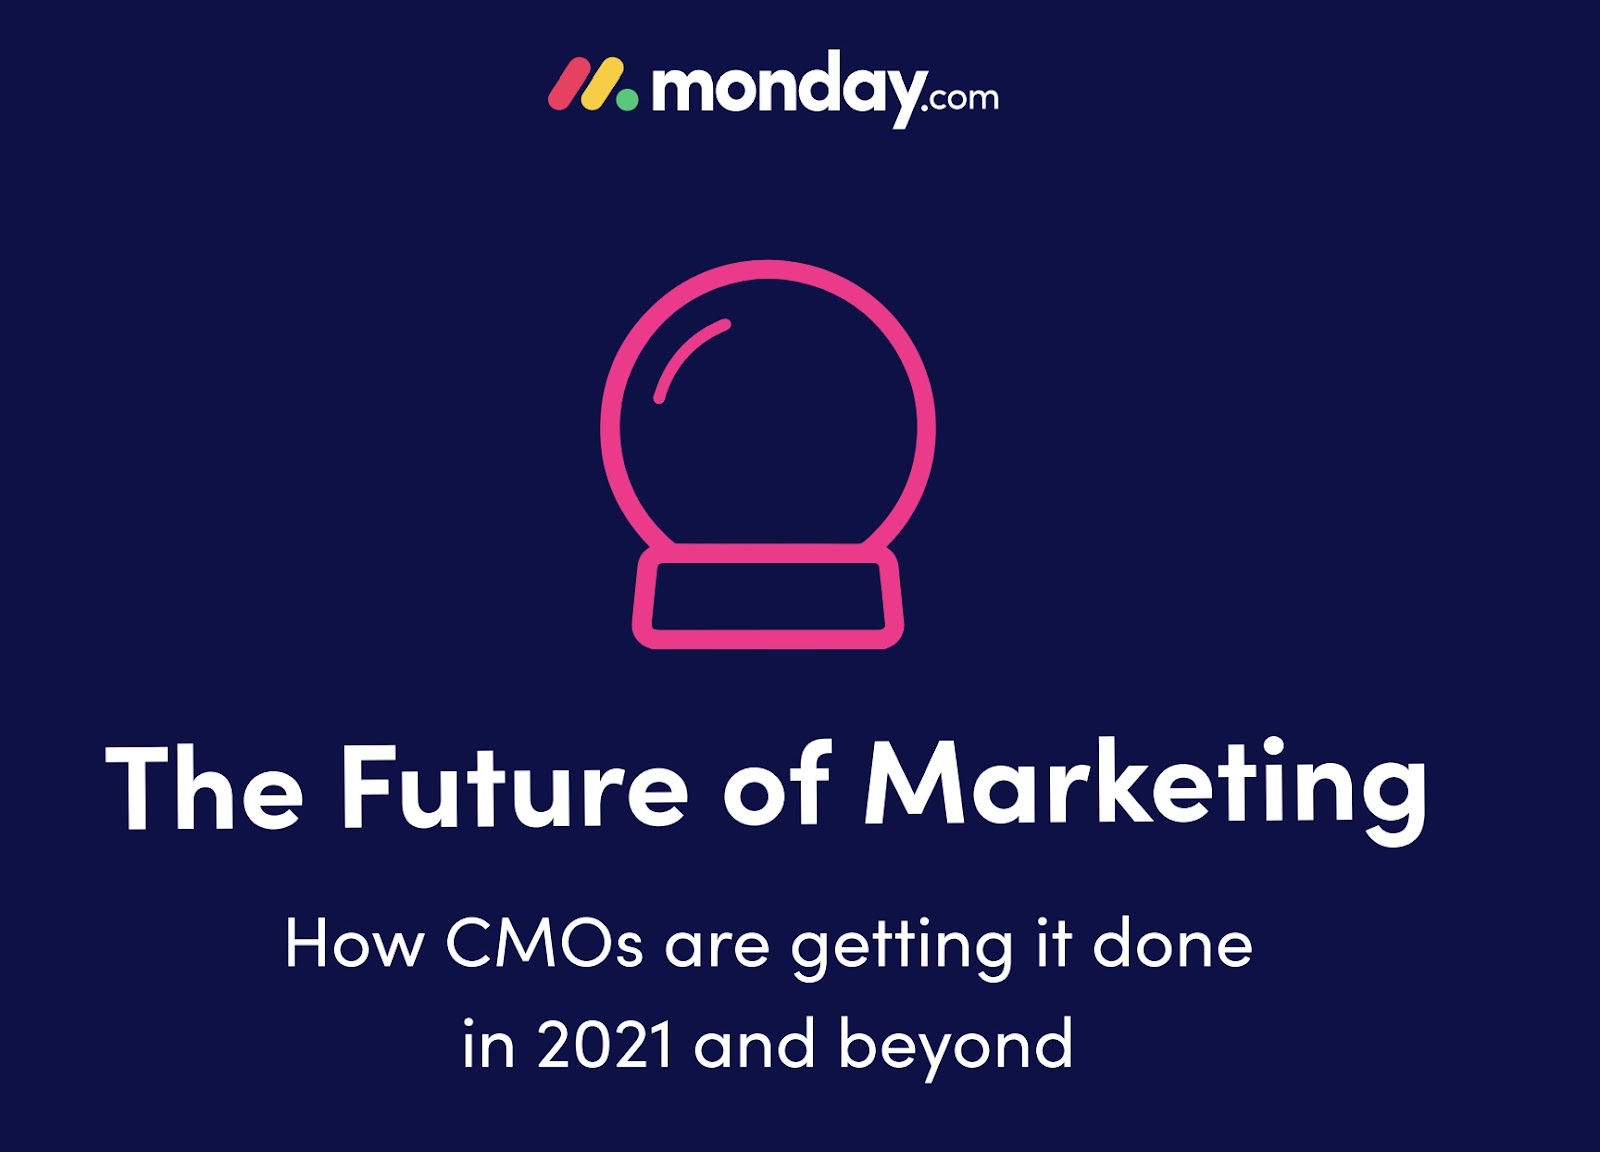 Monday's "The Future of Marketing" study  from 2021